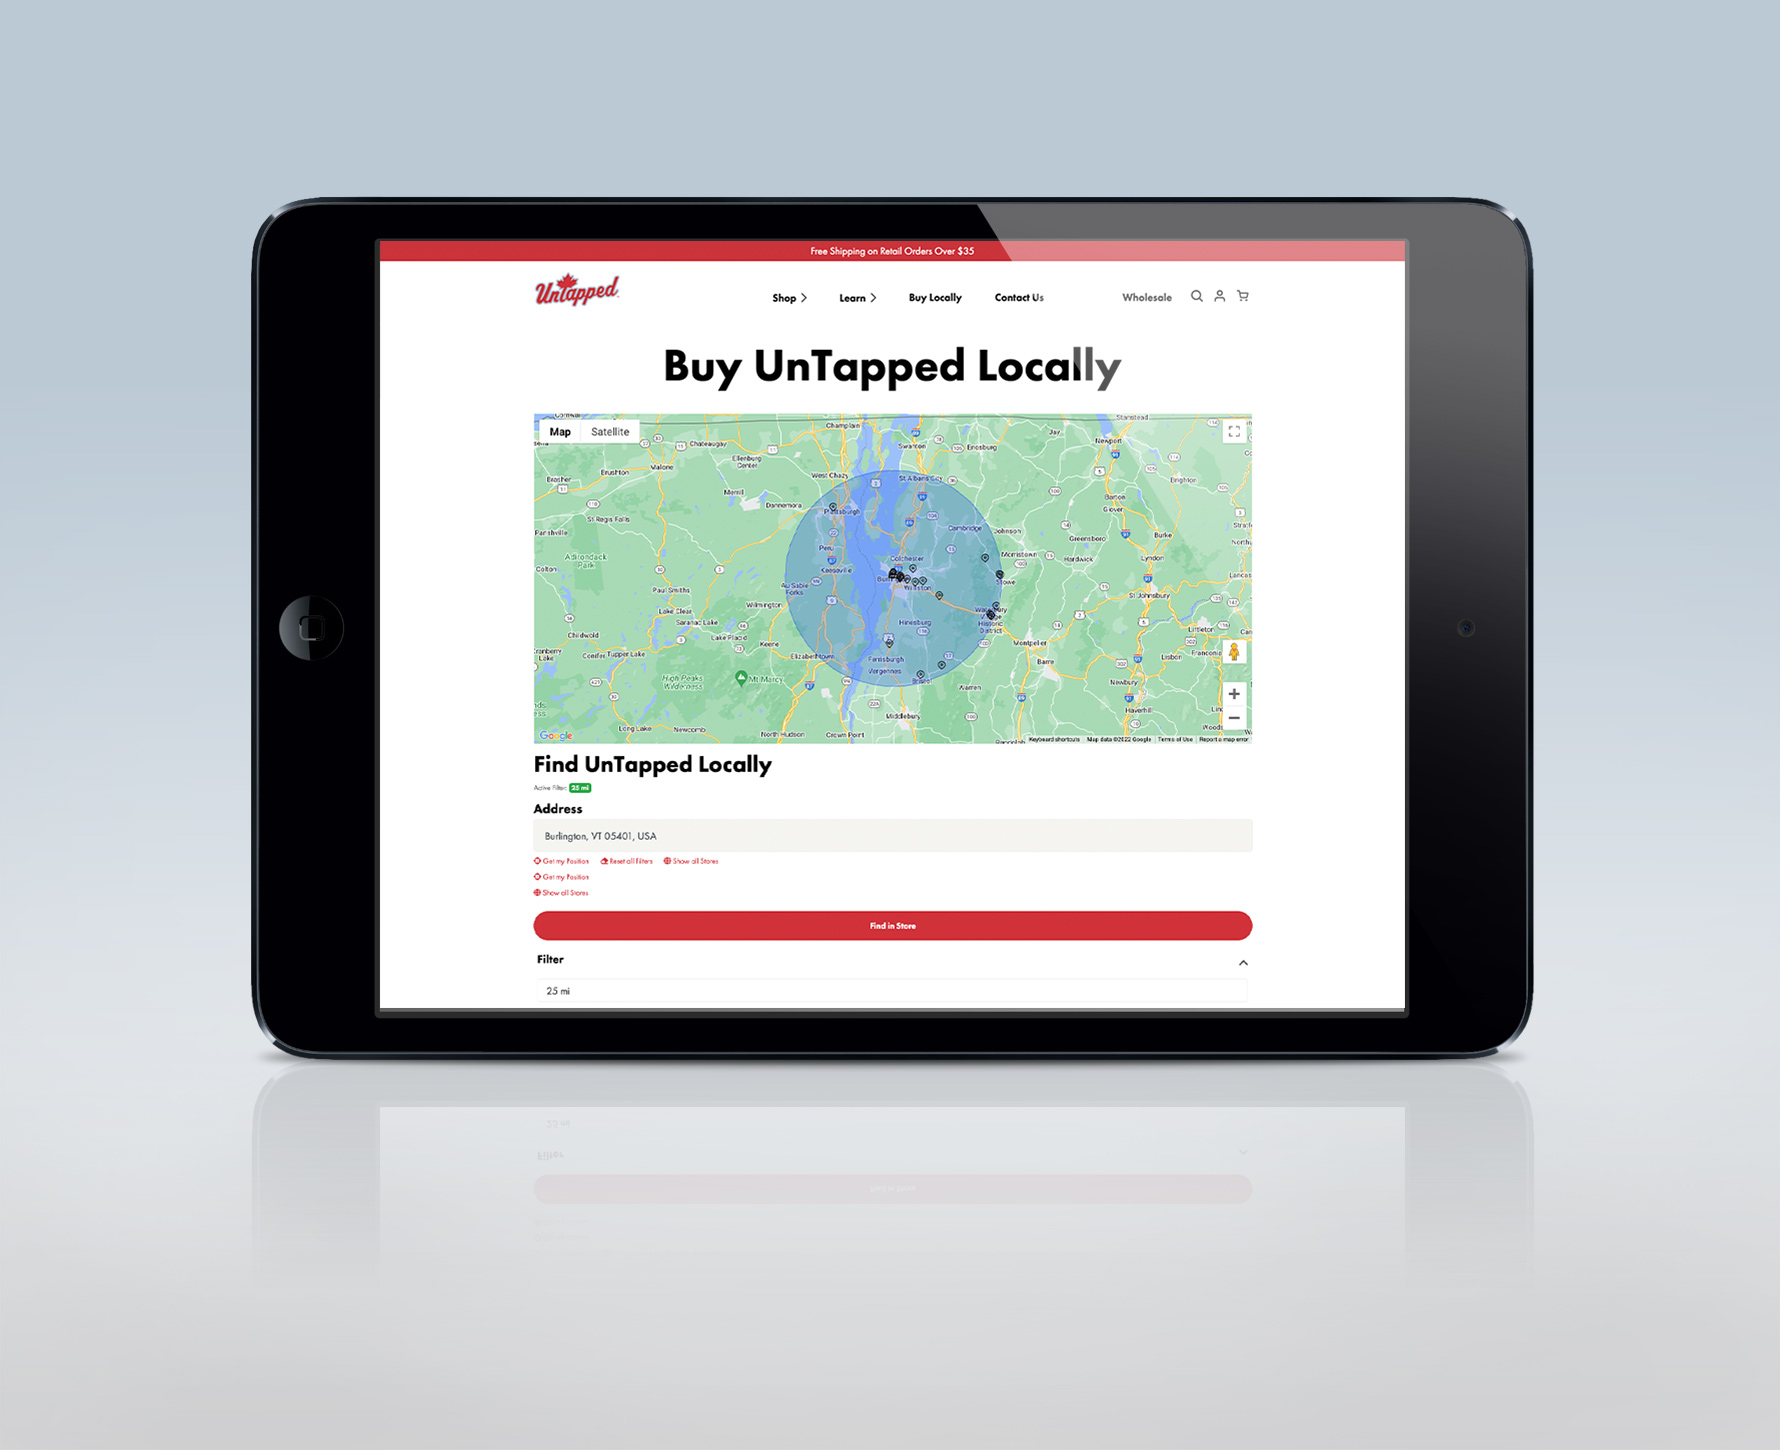 New Buy UnTapped Locally Page on iPad